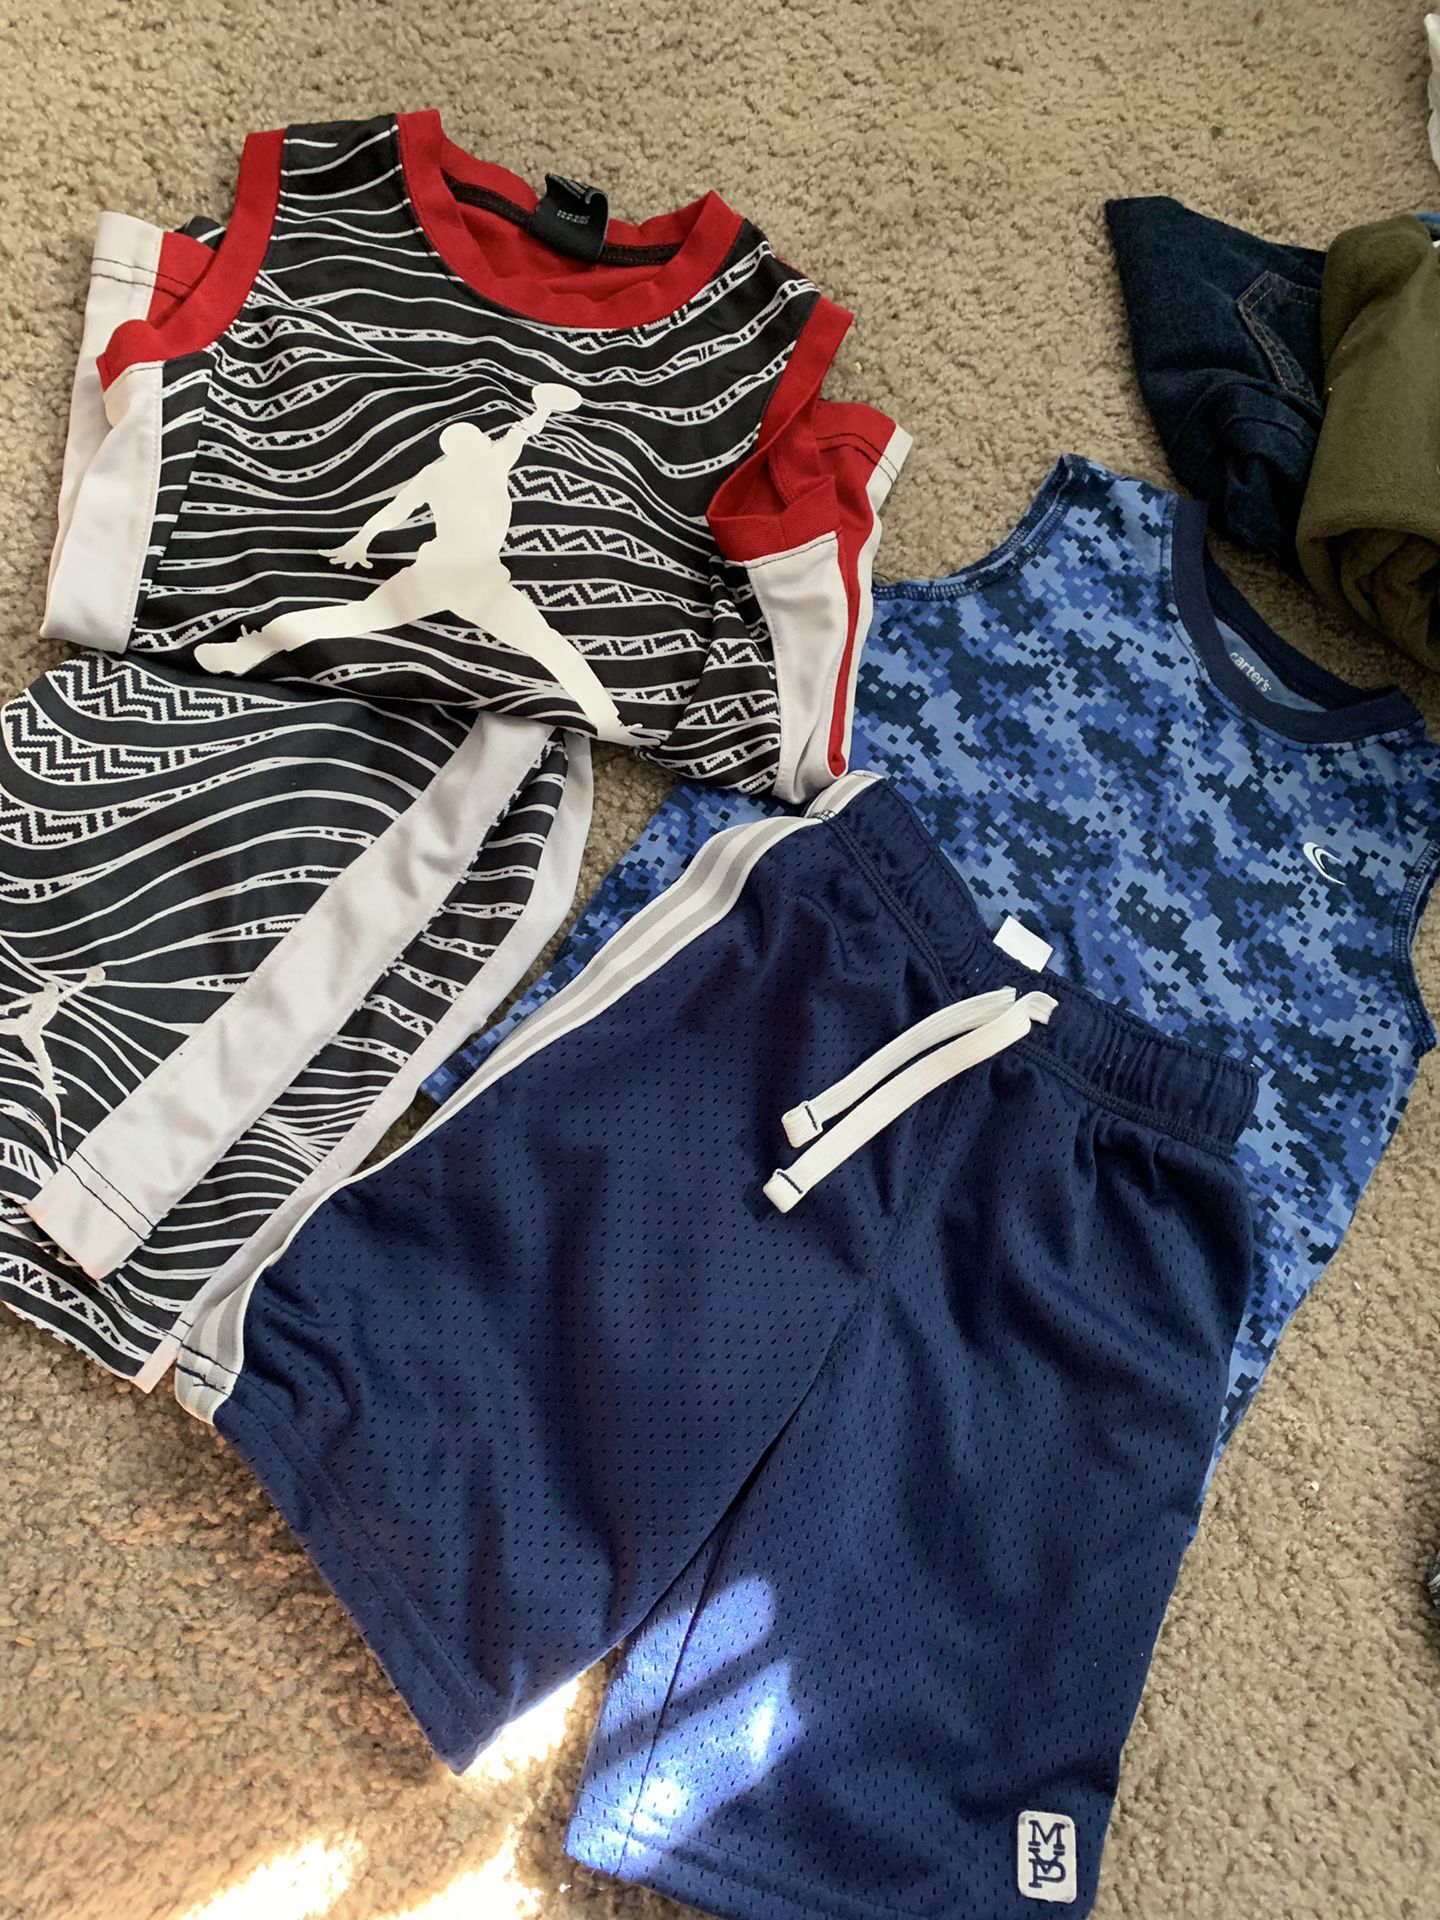 Kids sports clothes